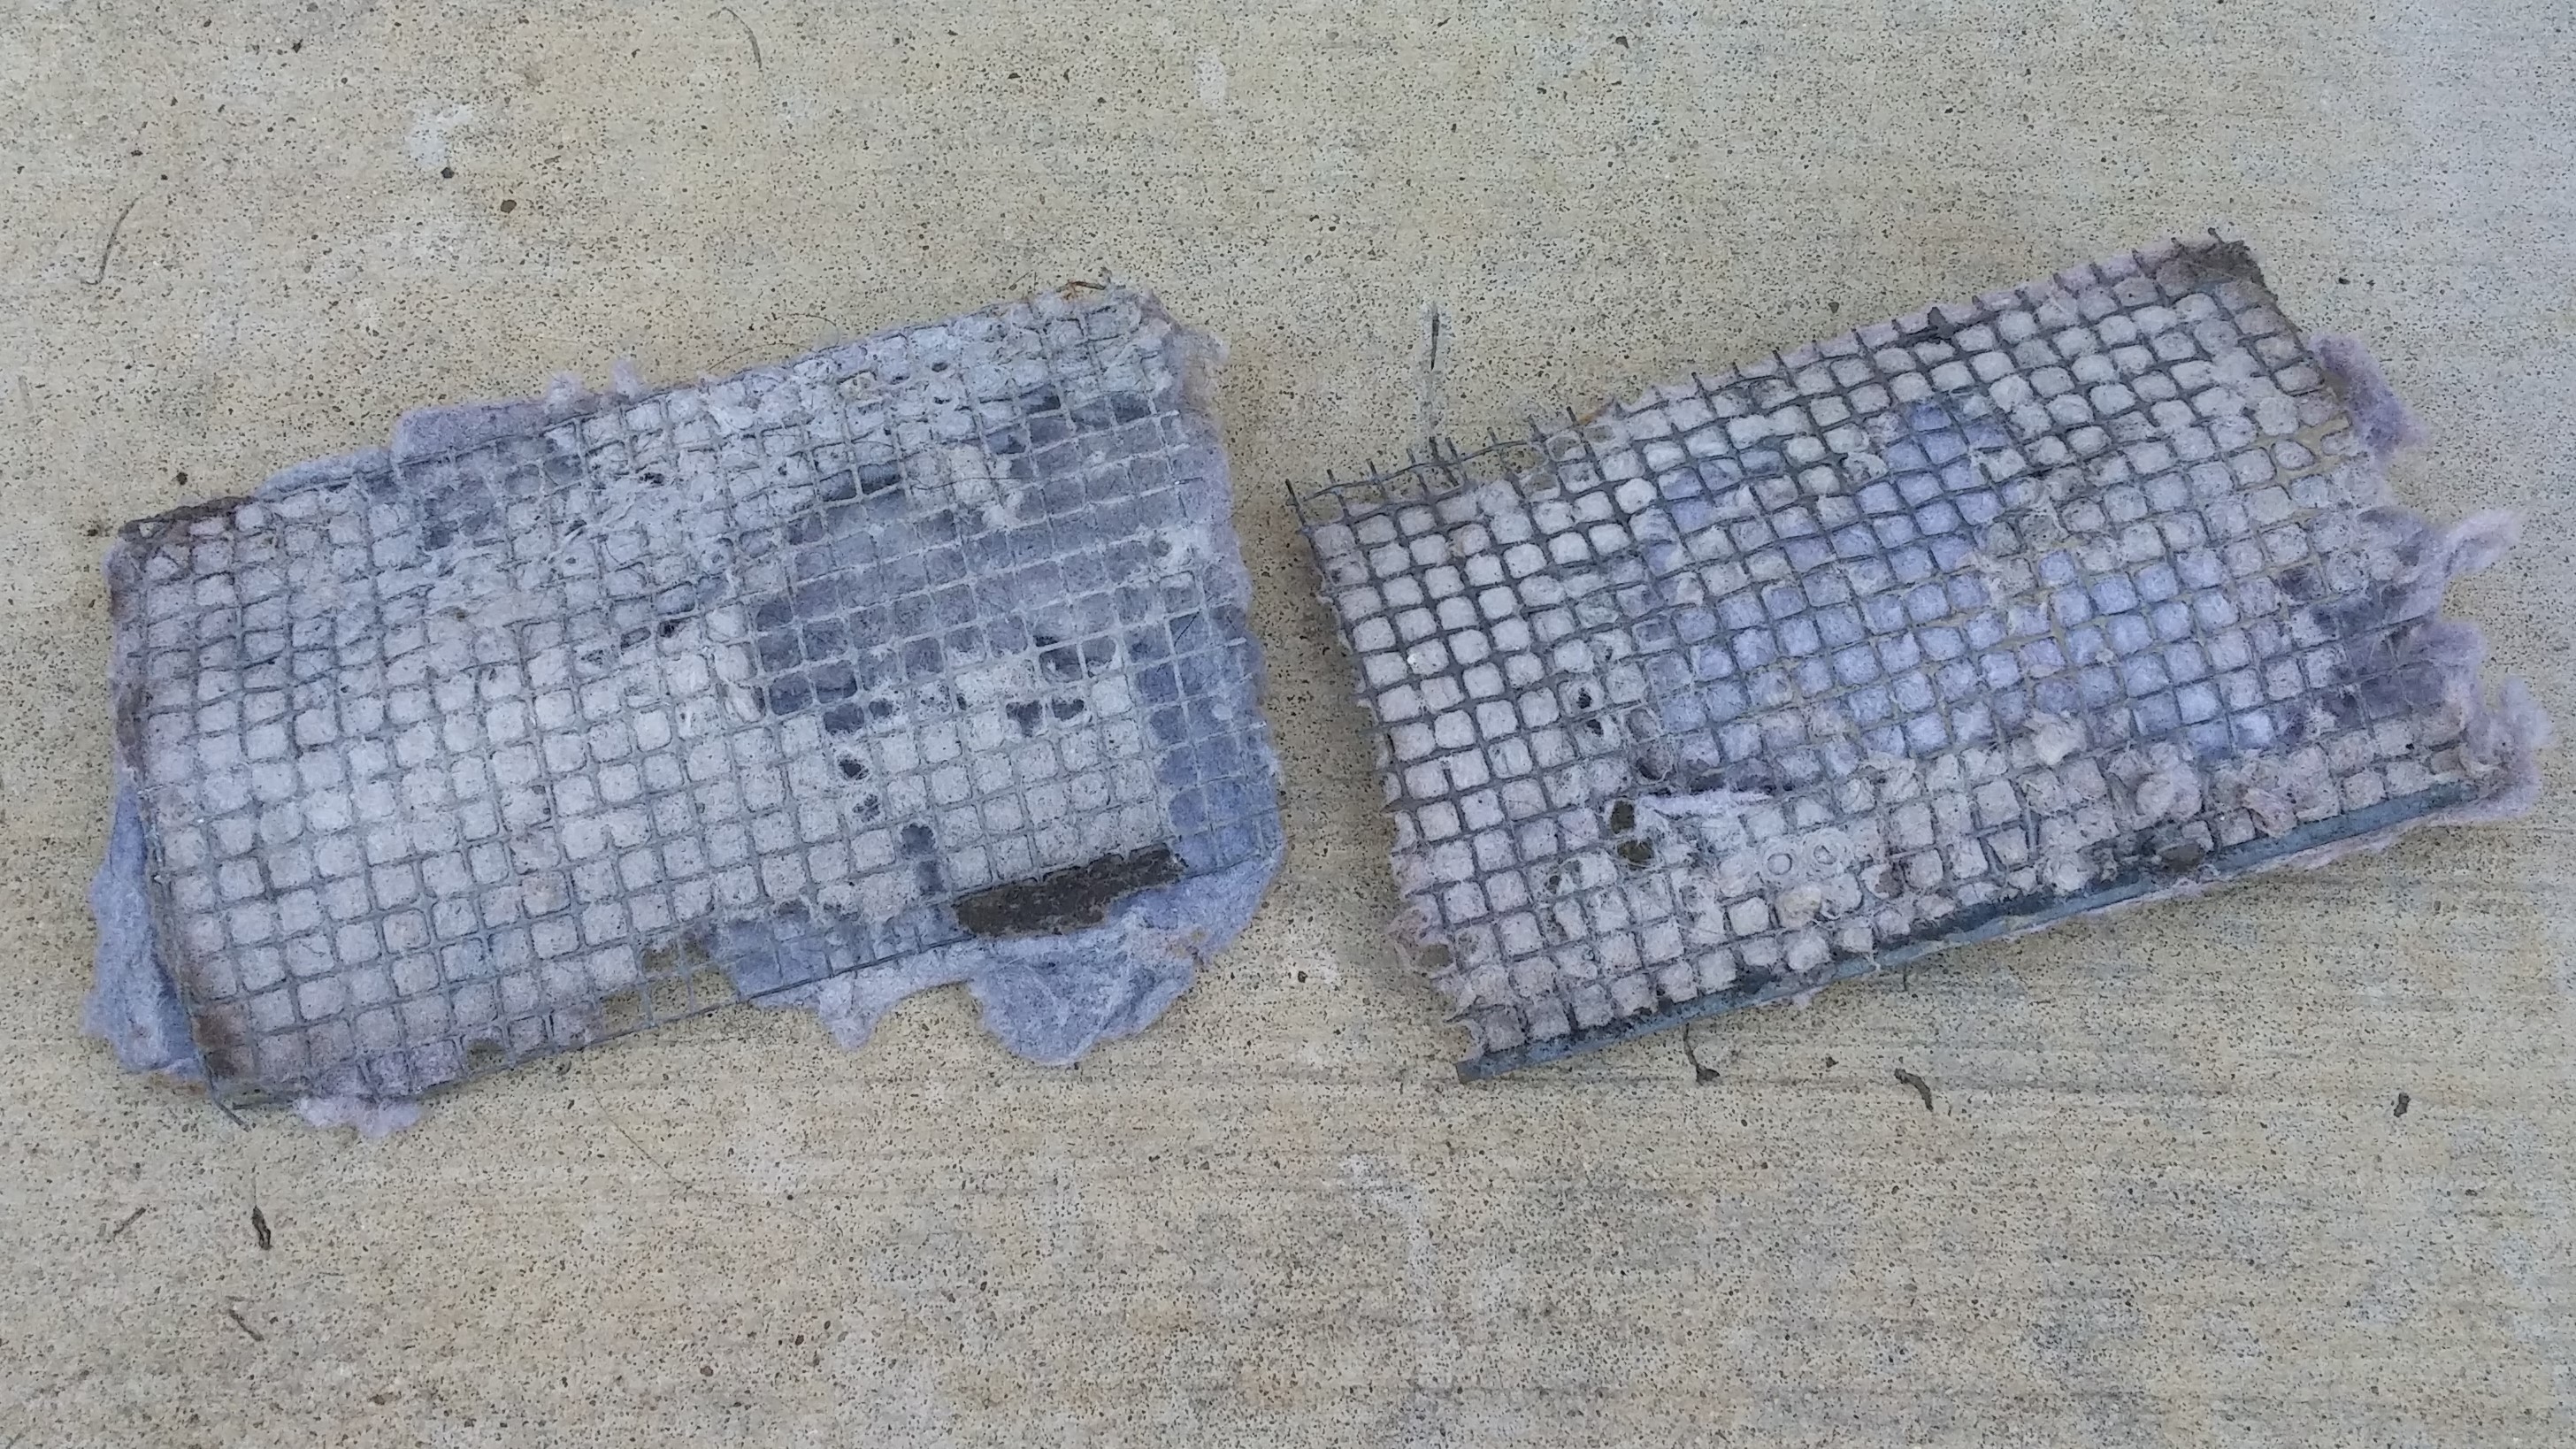 2 dryer vent filters before we cleaned them